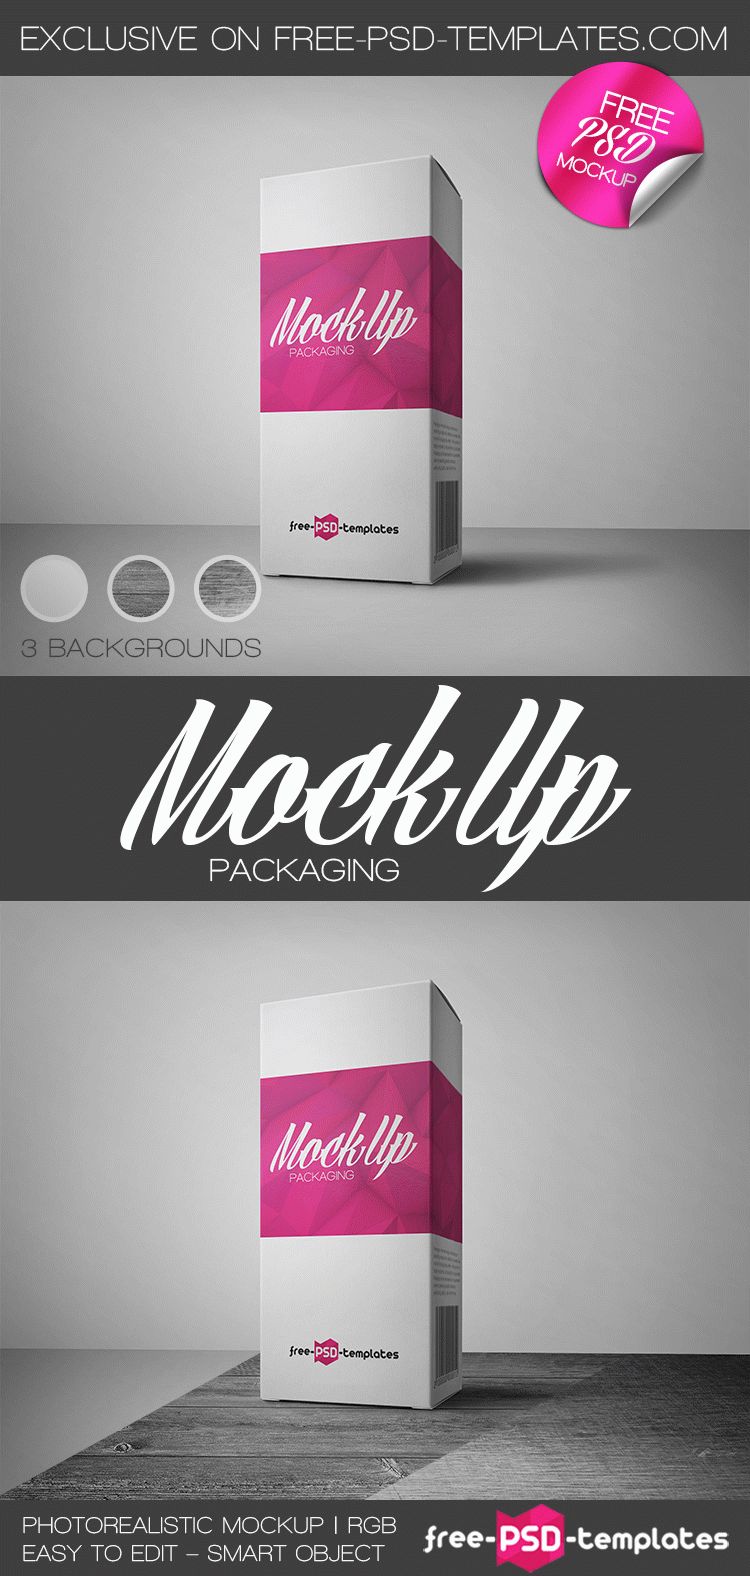 Download Free Packaging Mock-up in PSD | Free PSD Templates